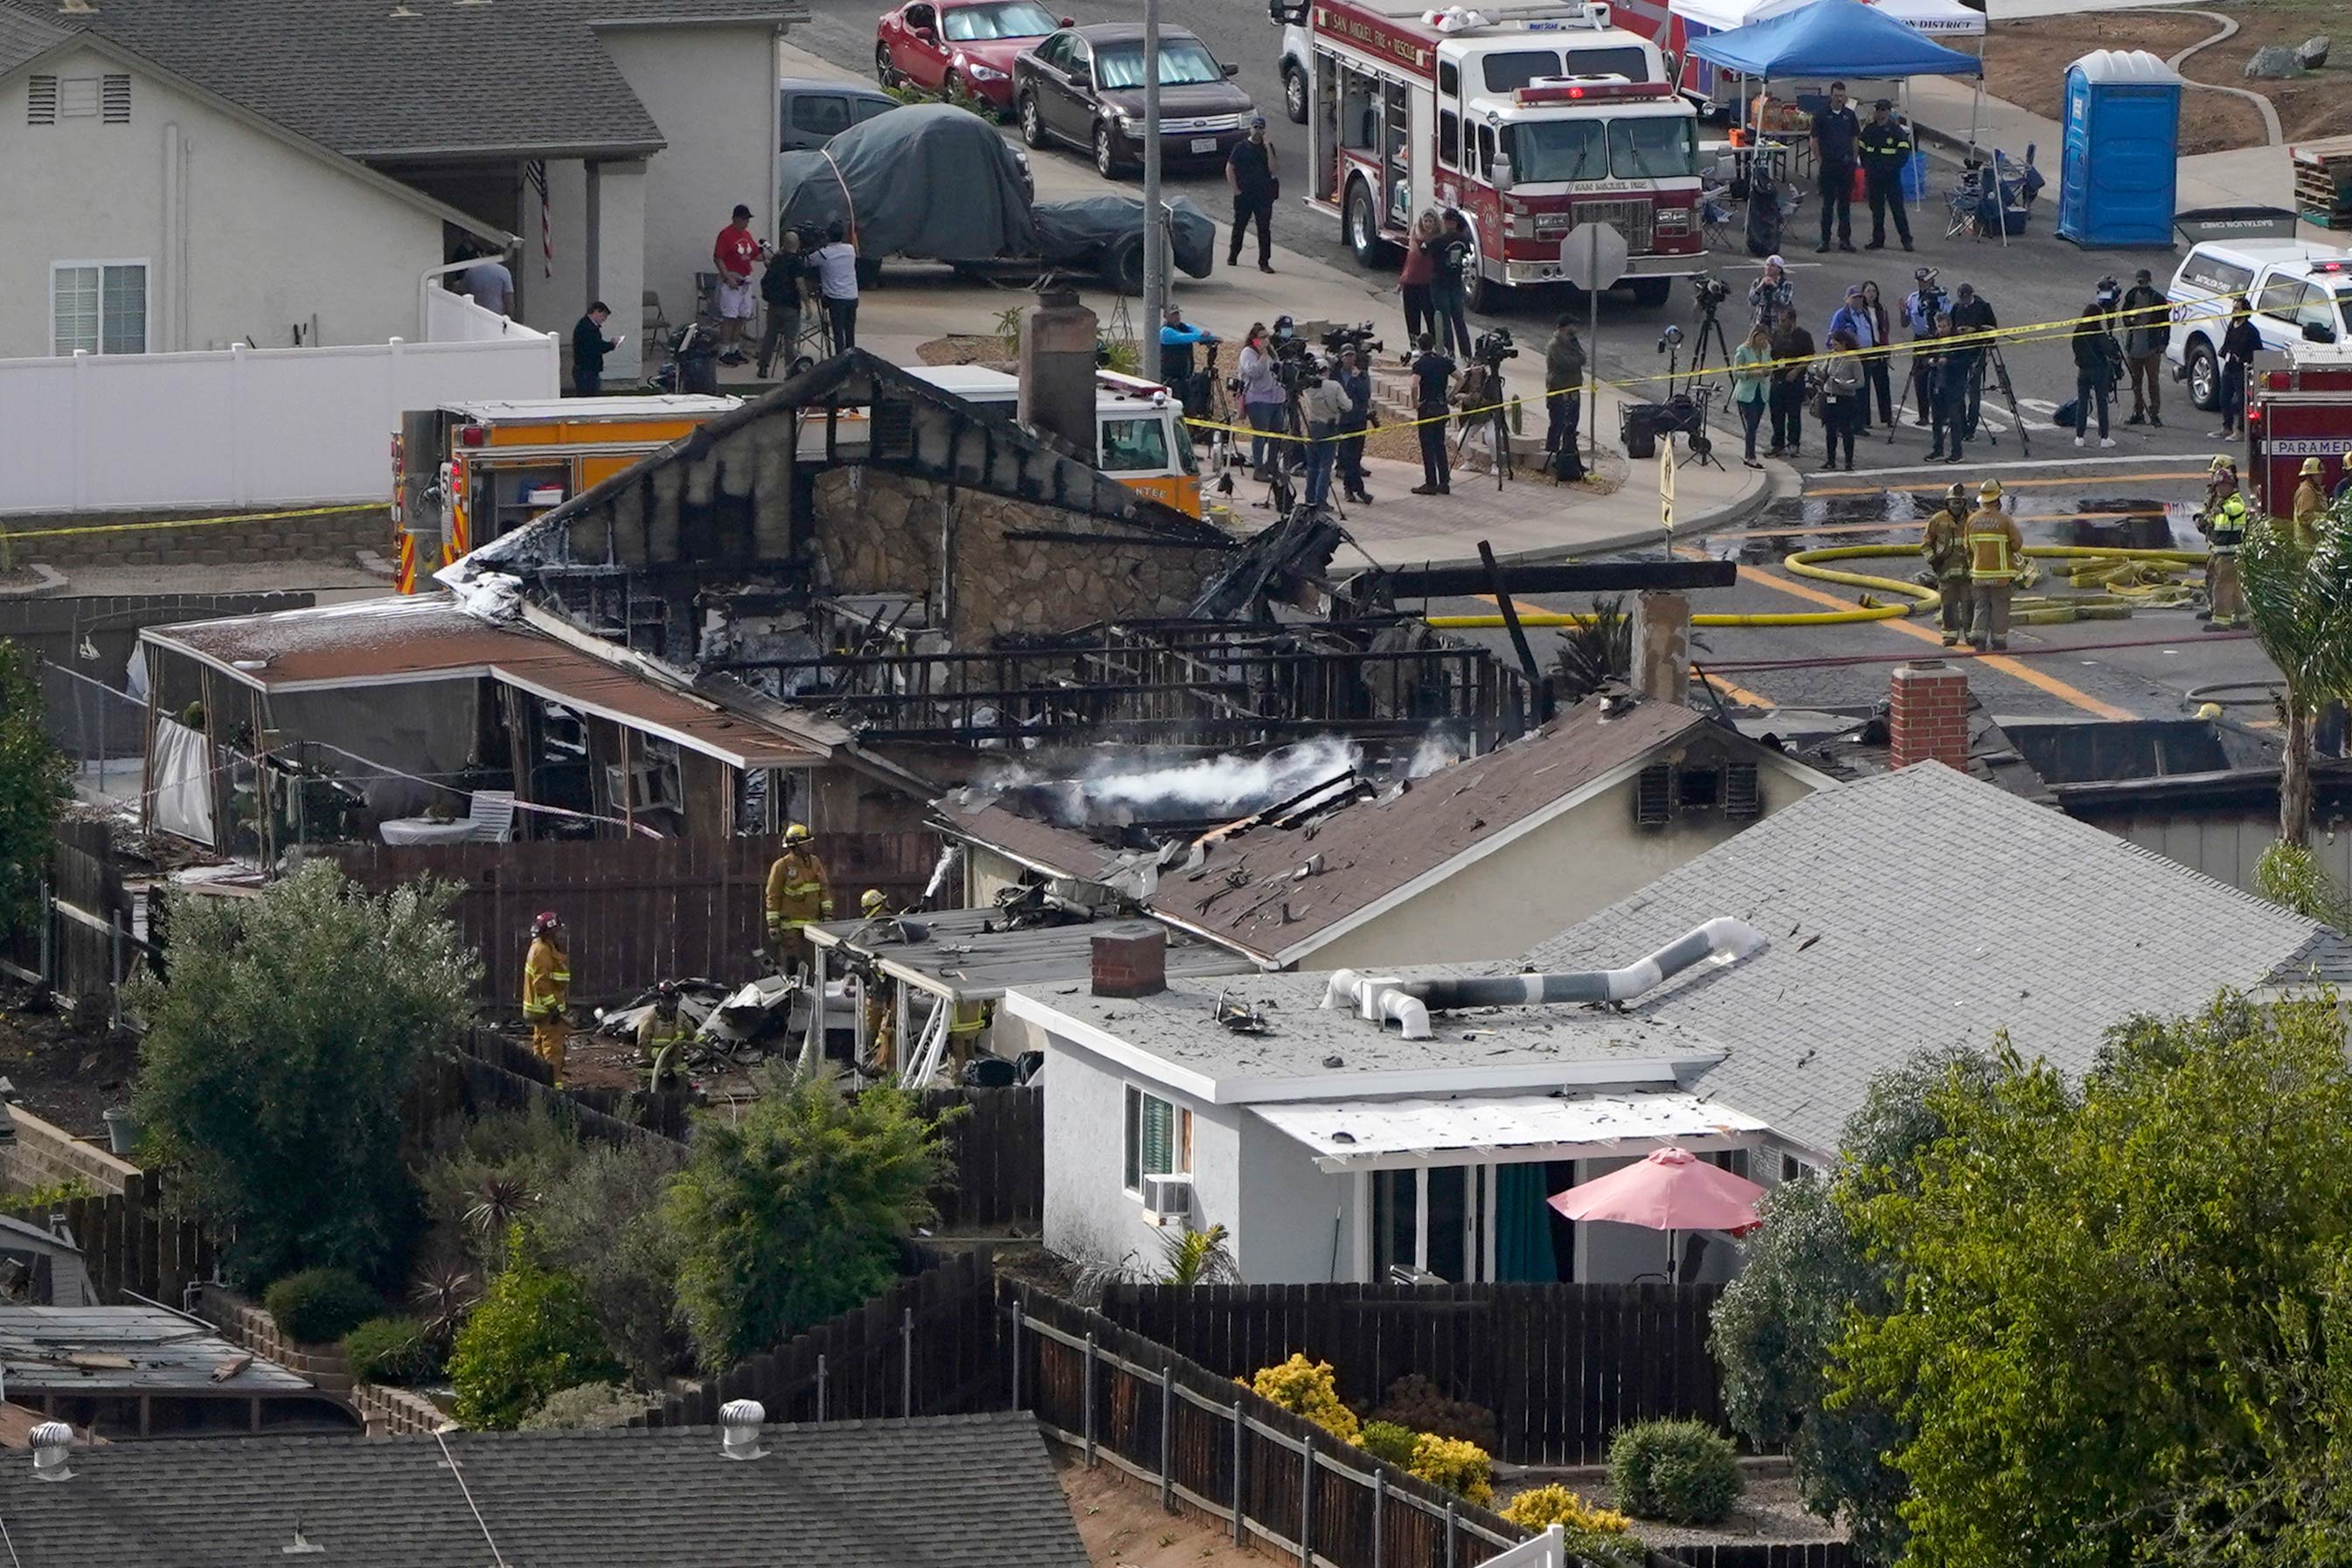 California couple's home was destroyed Monday by a small plane